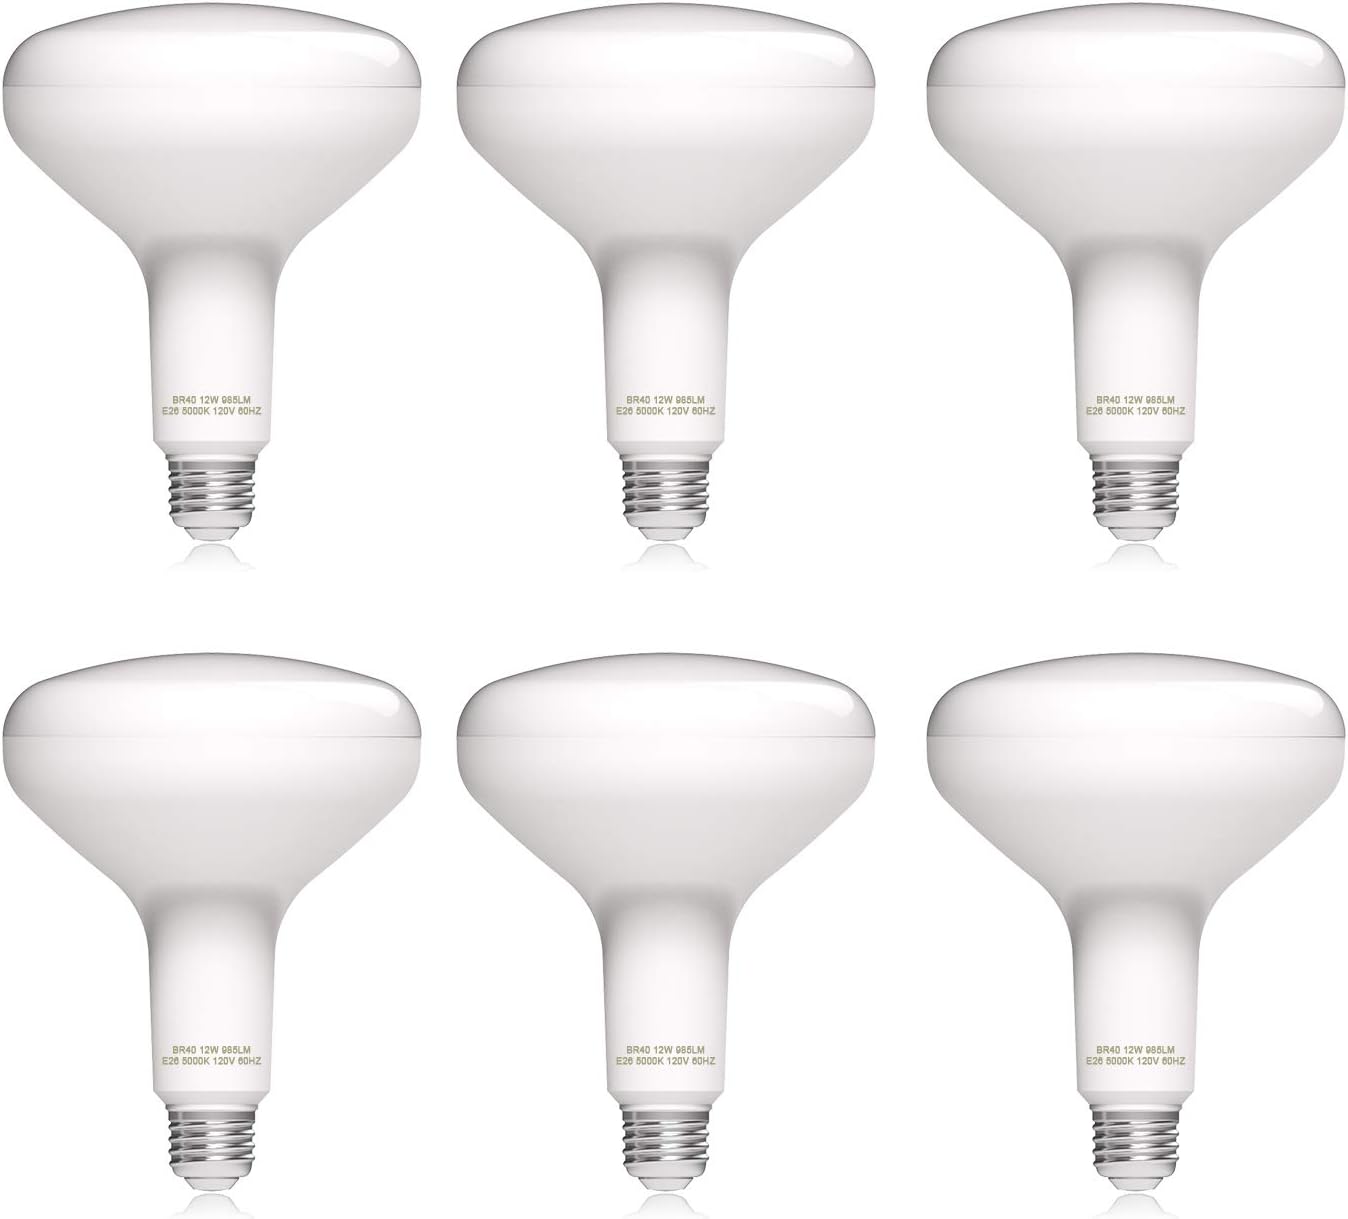 6-Count helloify Dimmable BR40 5000K LED Daylight Light Bulbs $5.30 + Free Shipping w/ Prime or on $35+